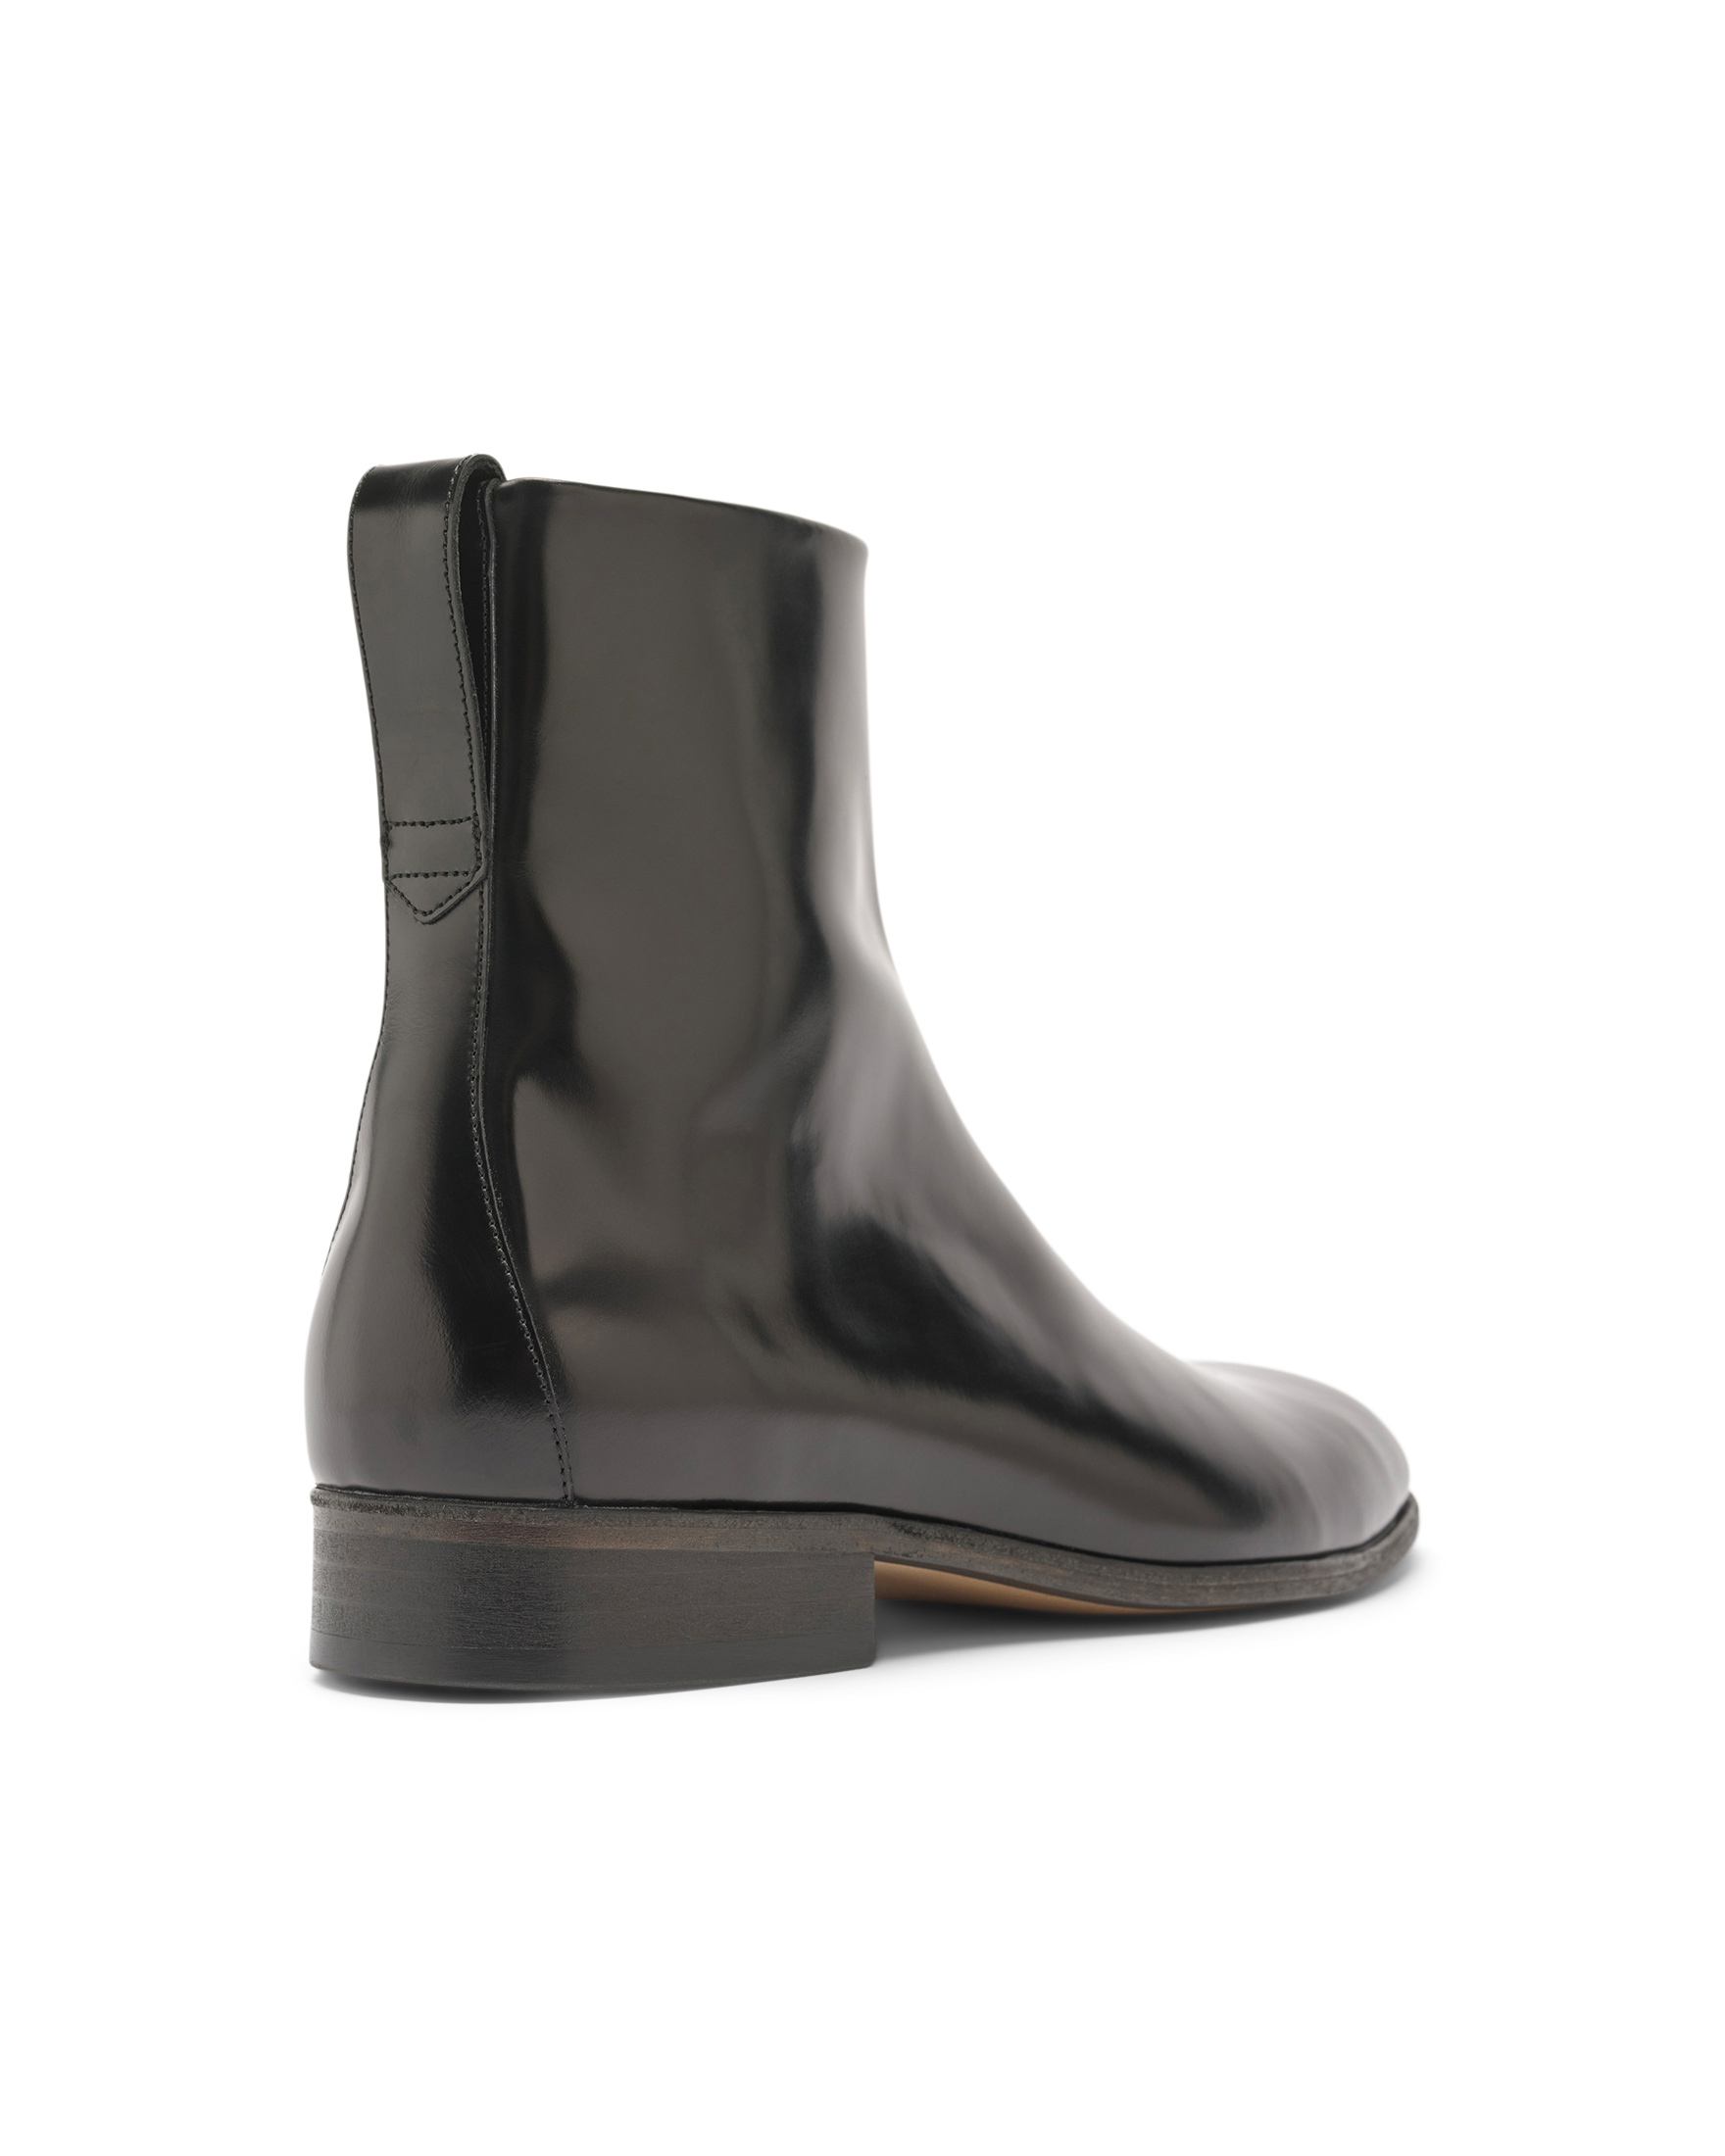 Our Legacy Black Envelope Boots